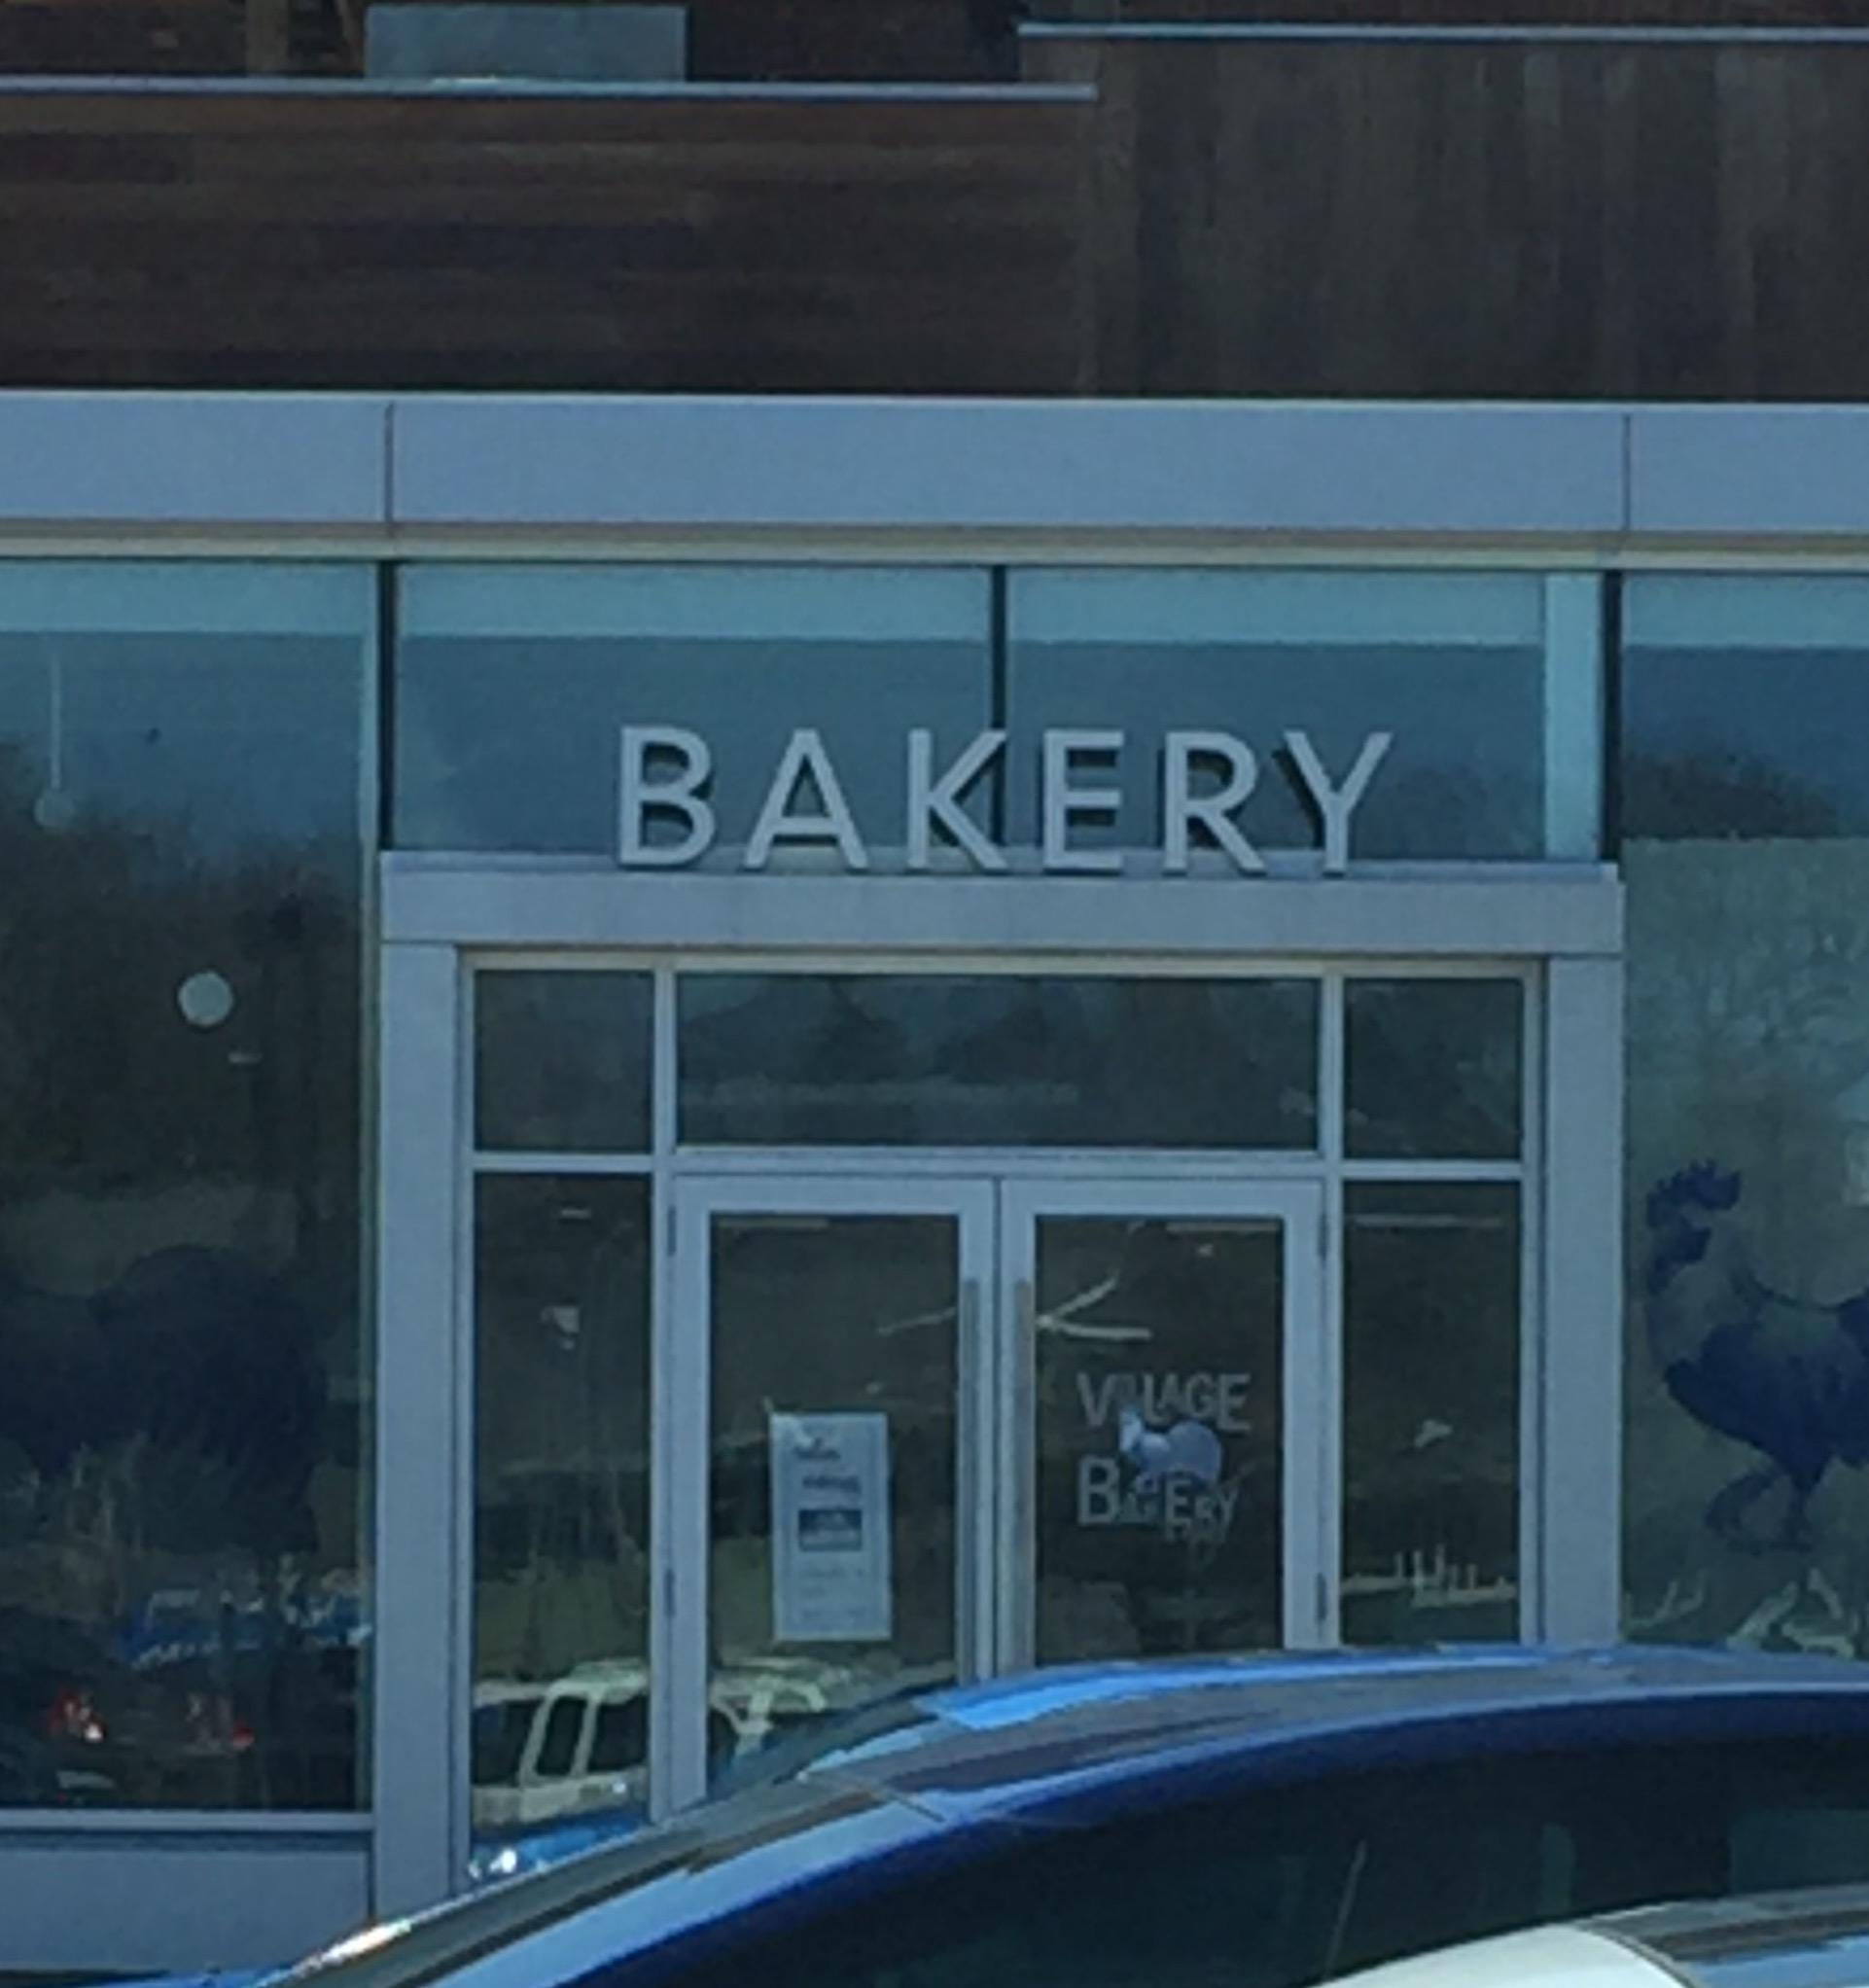 Pet Friendly Village Bakery and Cafe